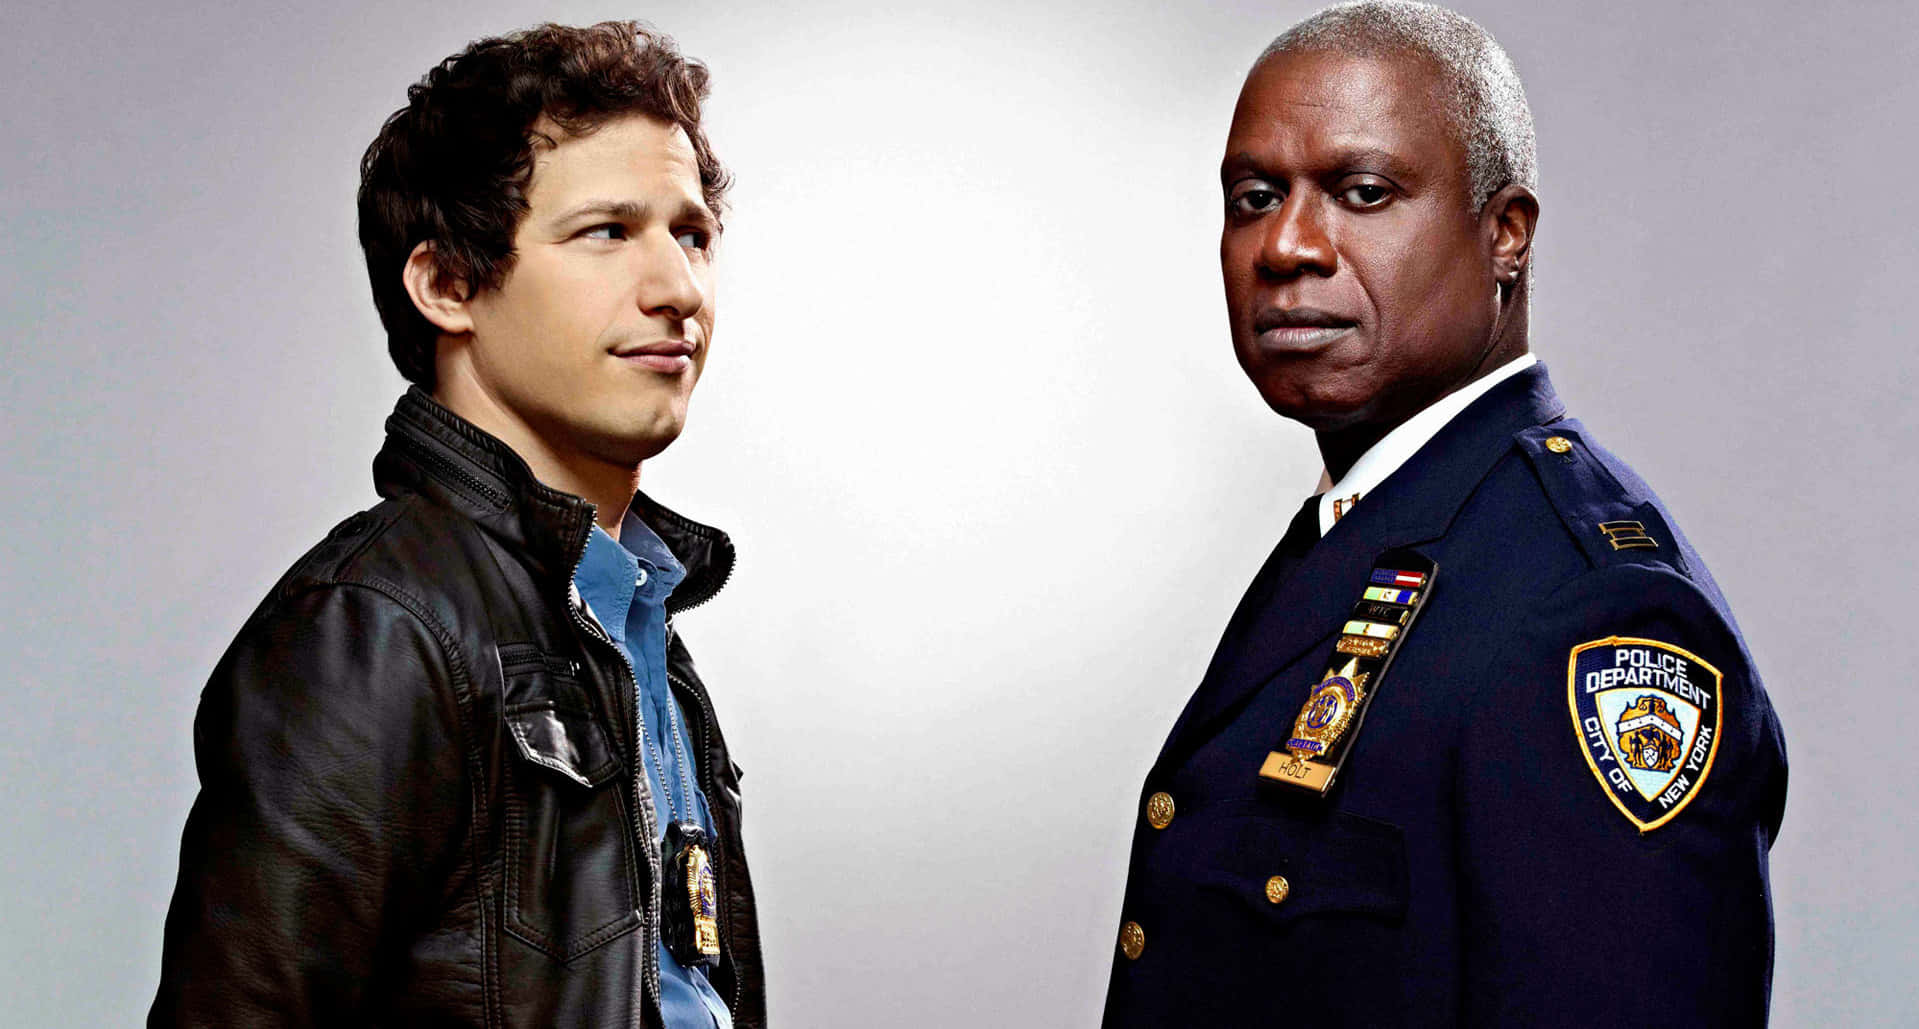 Detective Jake Peralta and his team overcome odds with laughter and justice